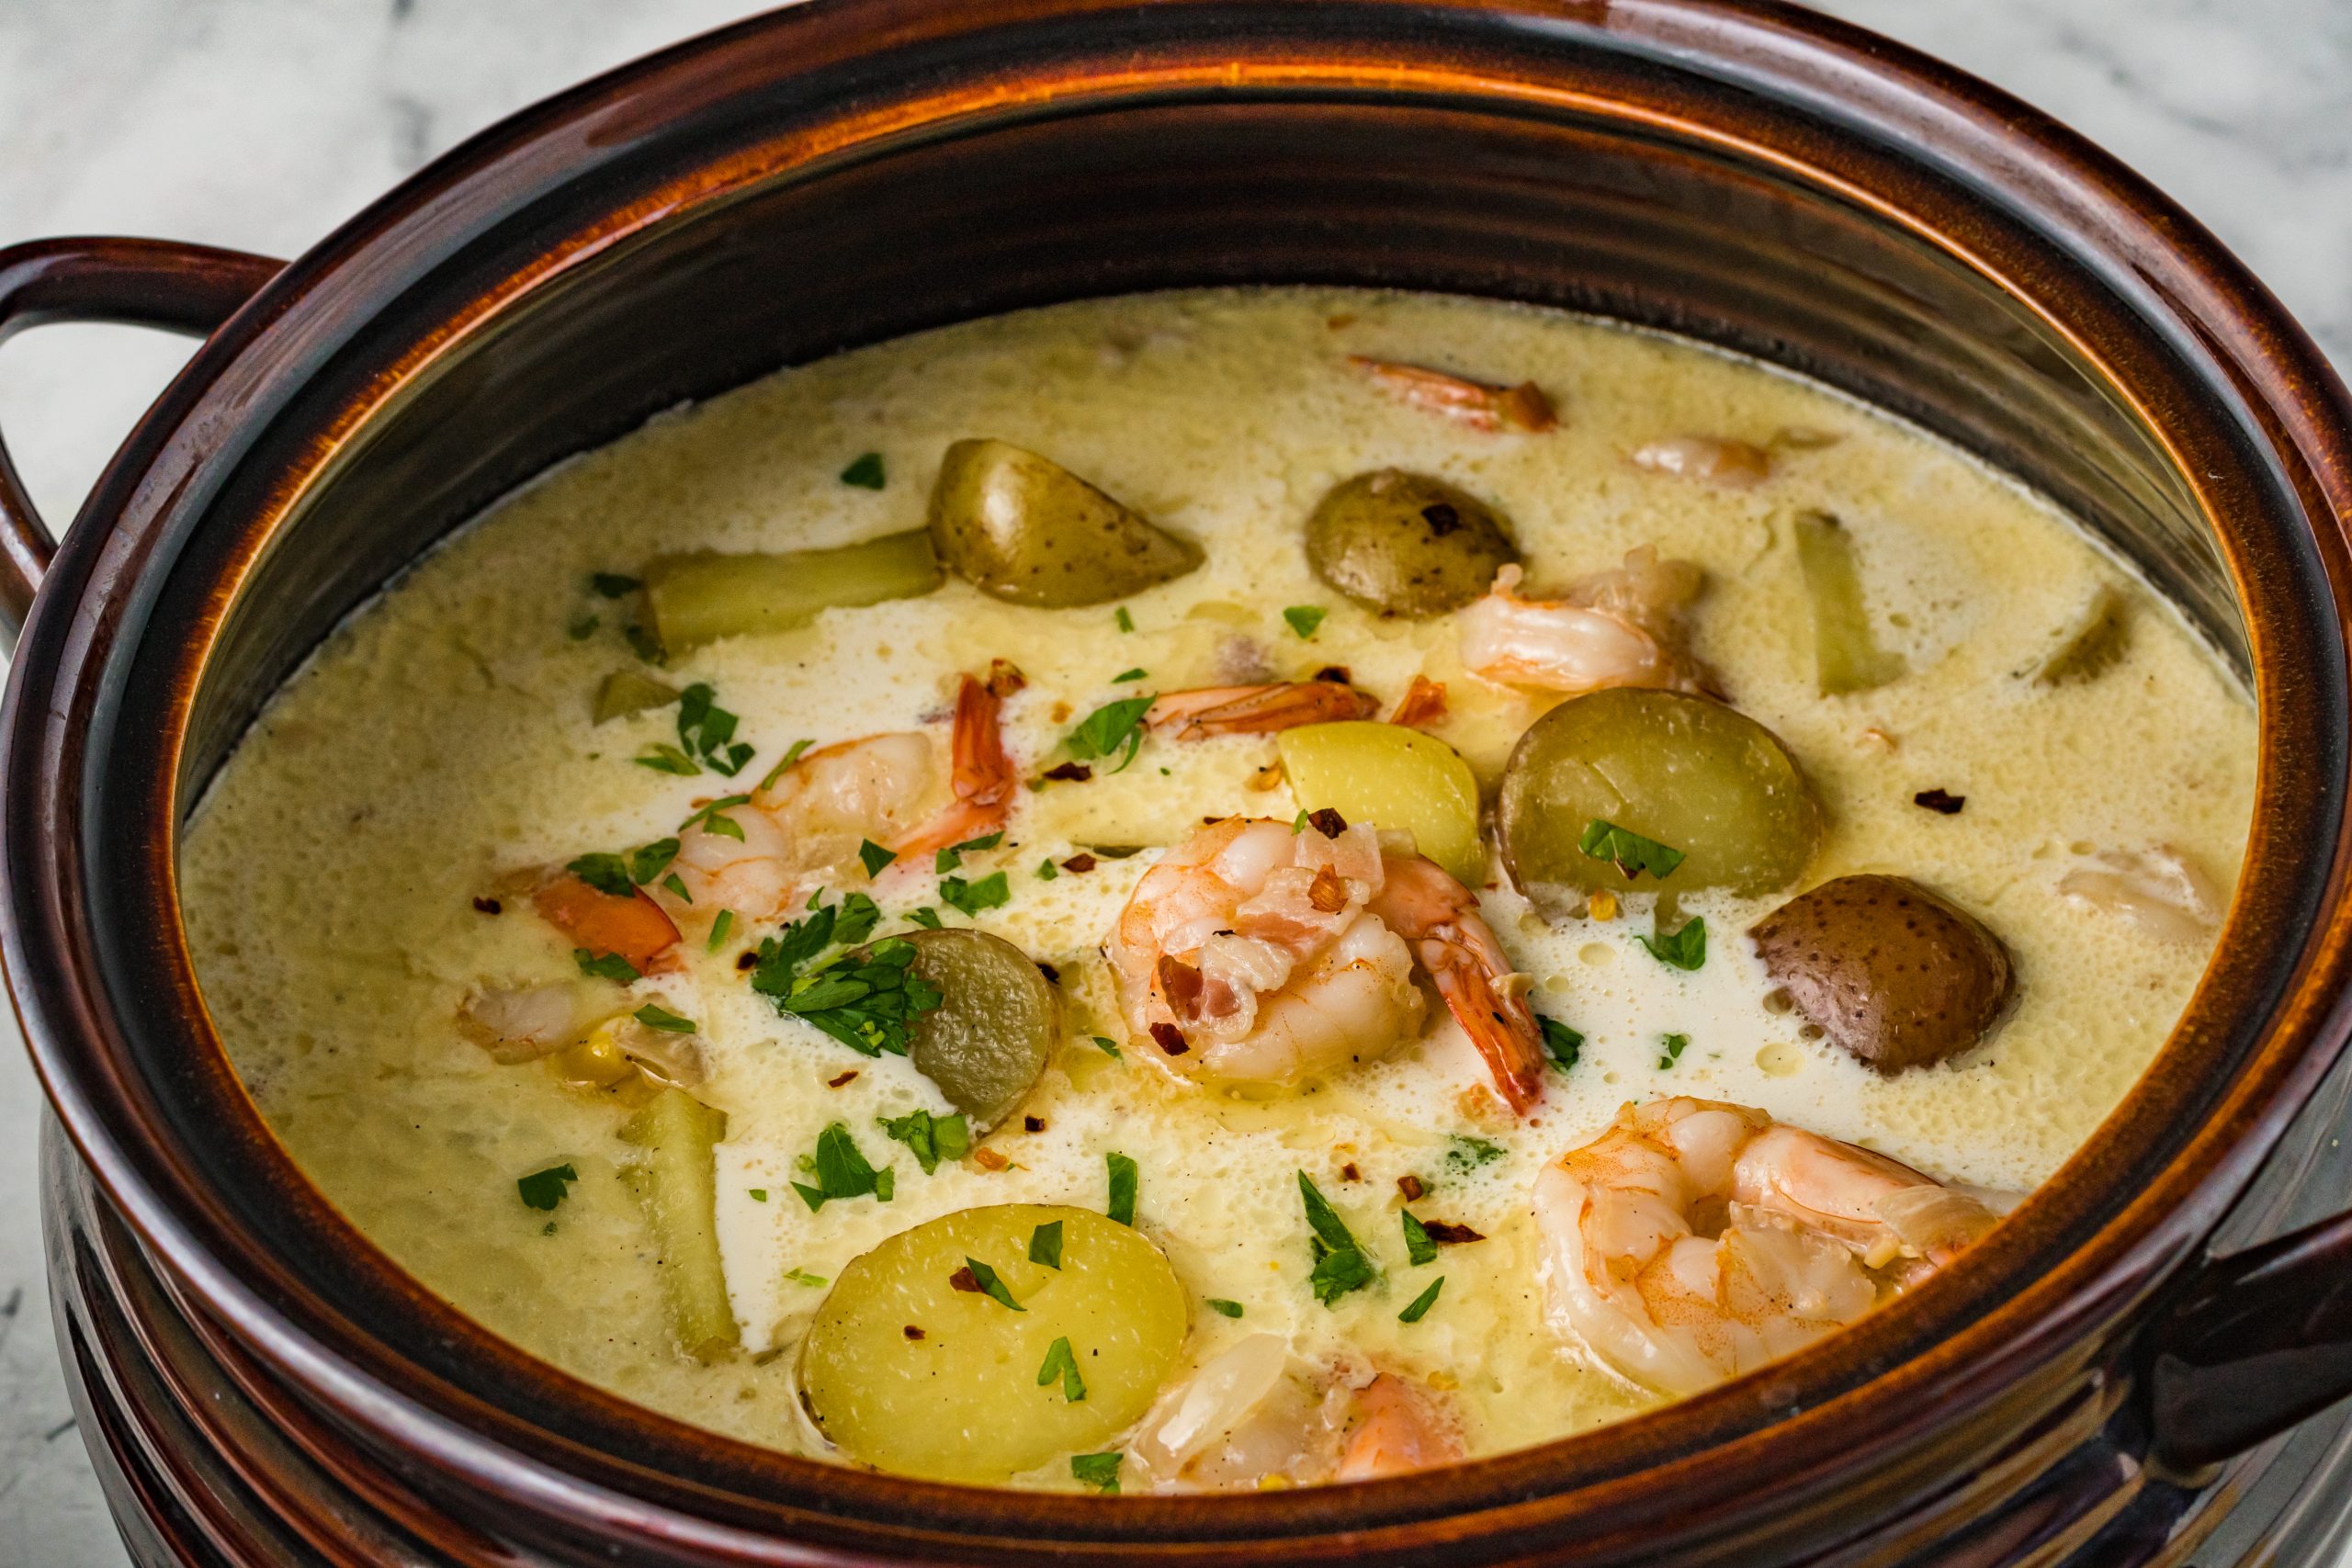 Shrimp and Potato Chowder in a large crock.